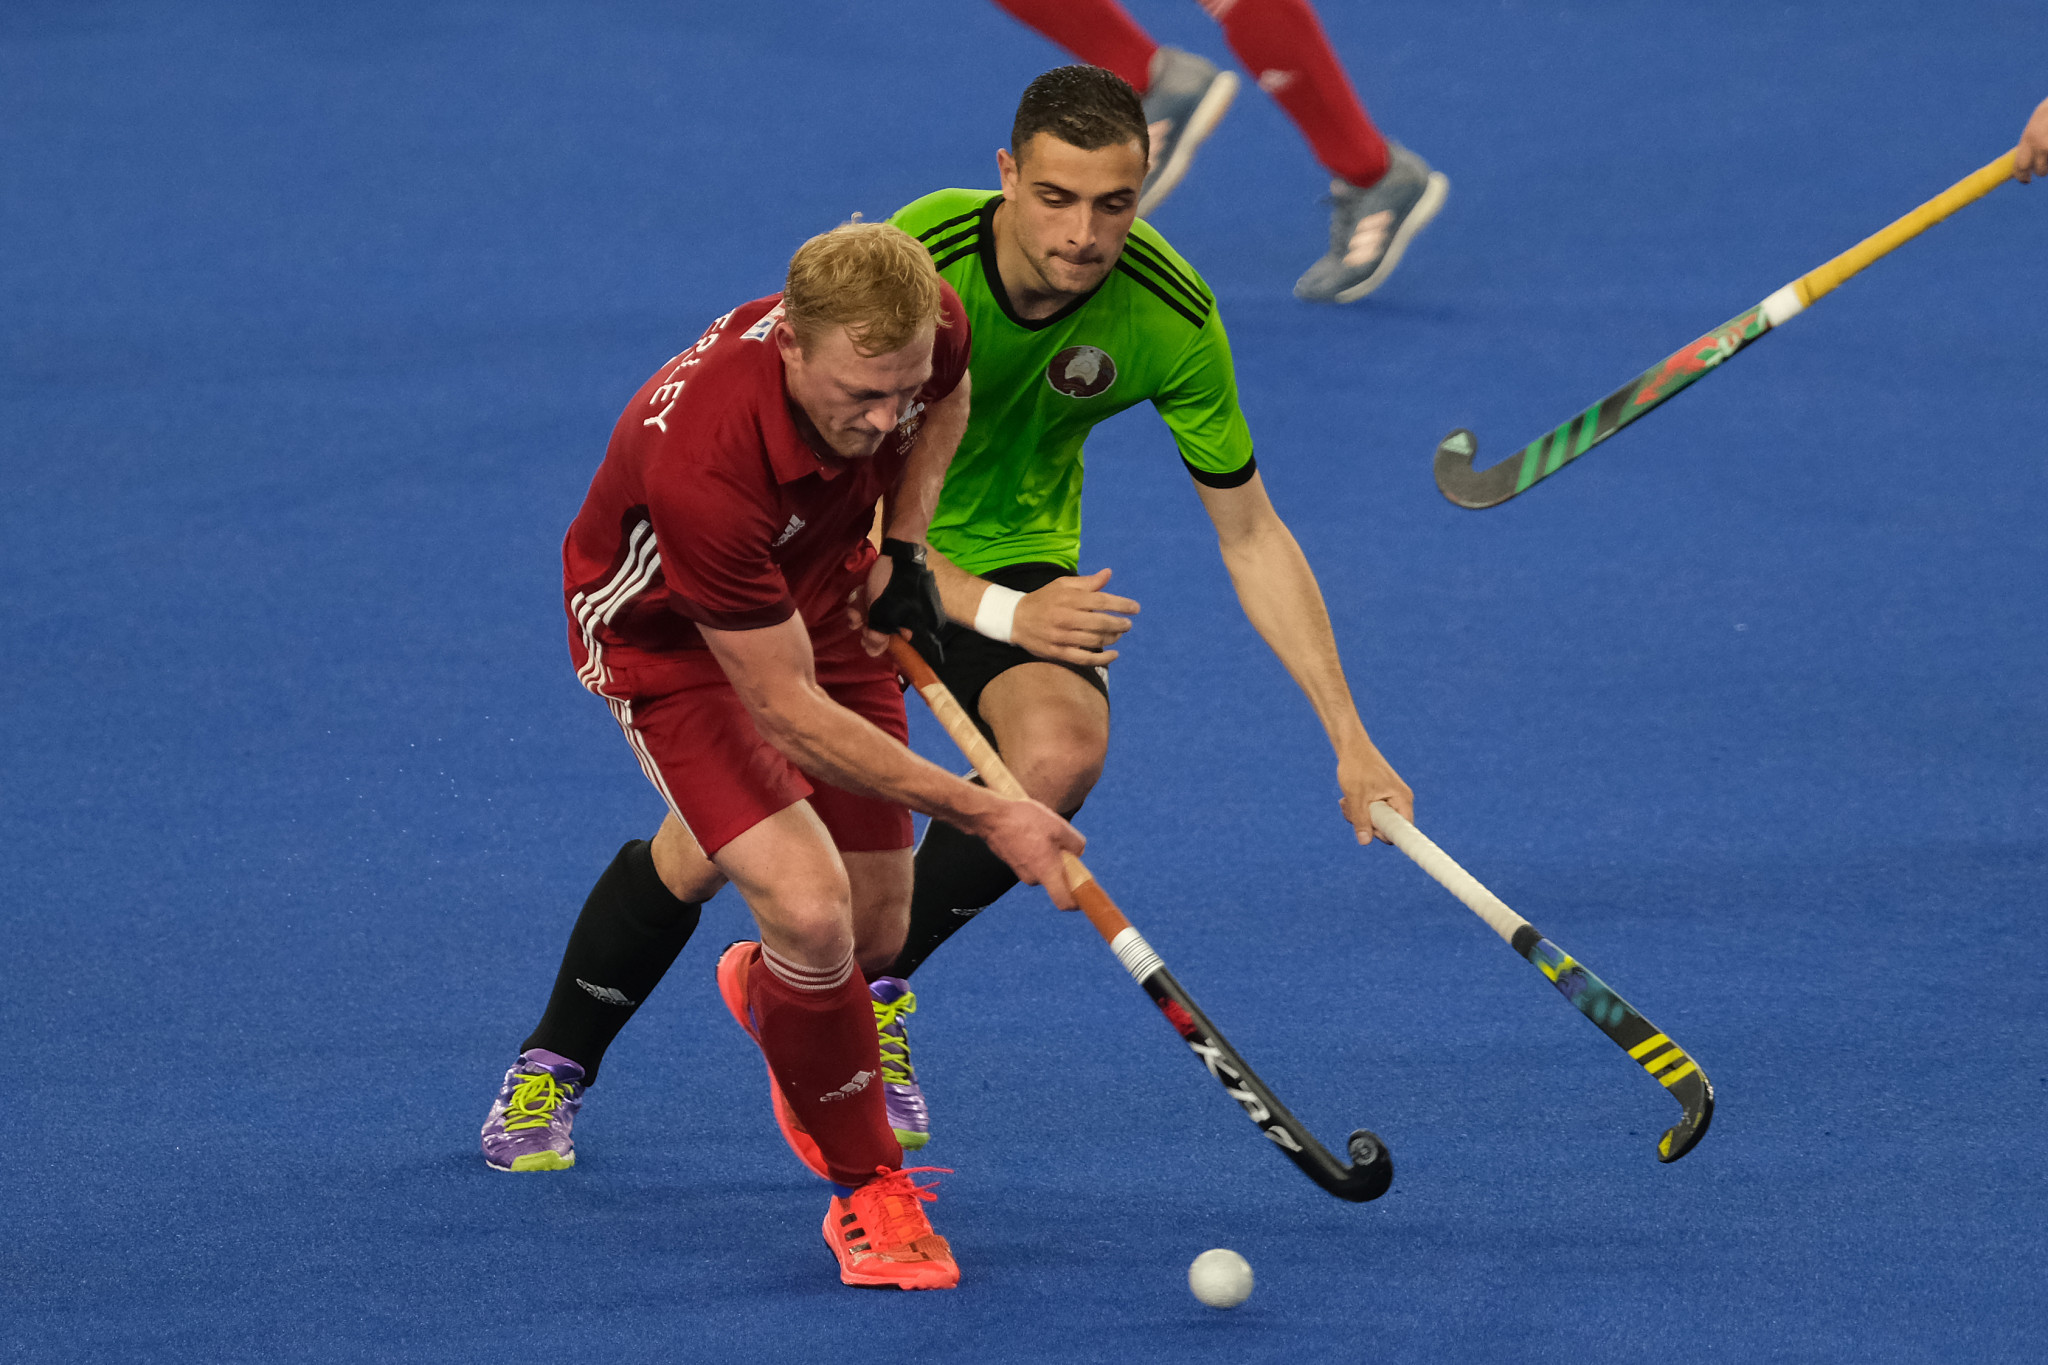 Wales got their second win in as many days against Belarus in the FIH Series Finals in Kuala Lumpur ©Getty Images